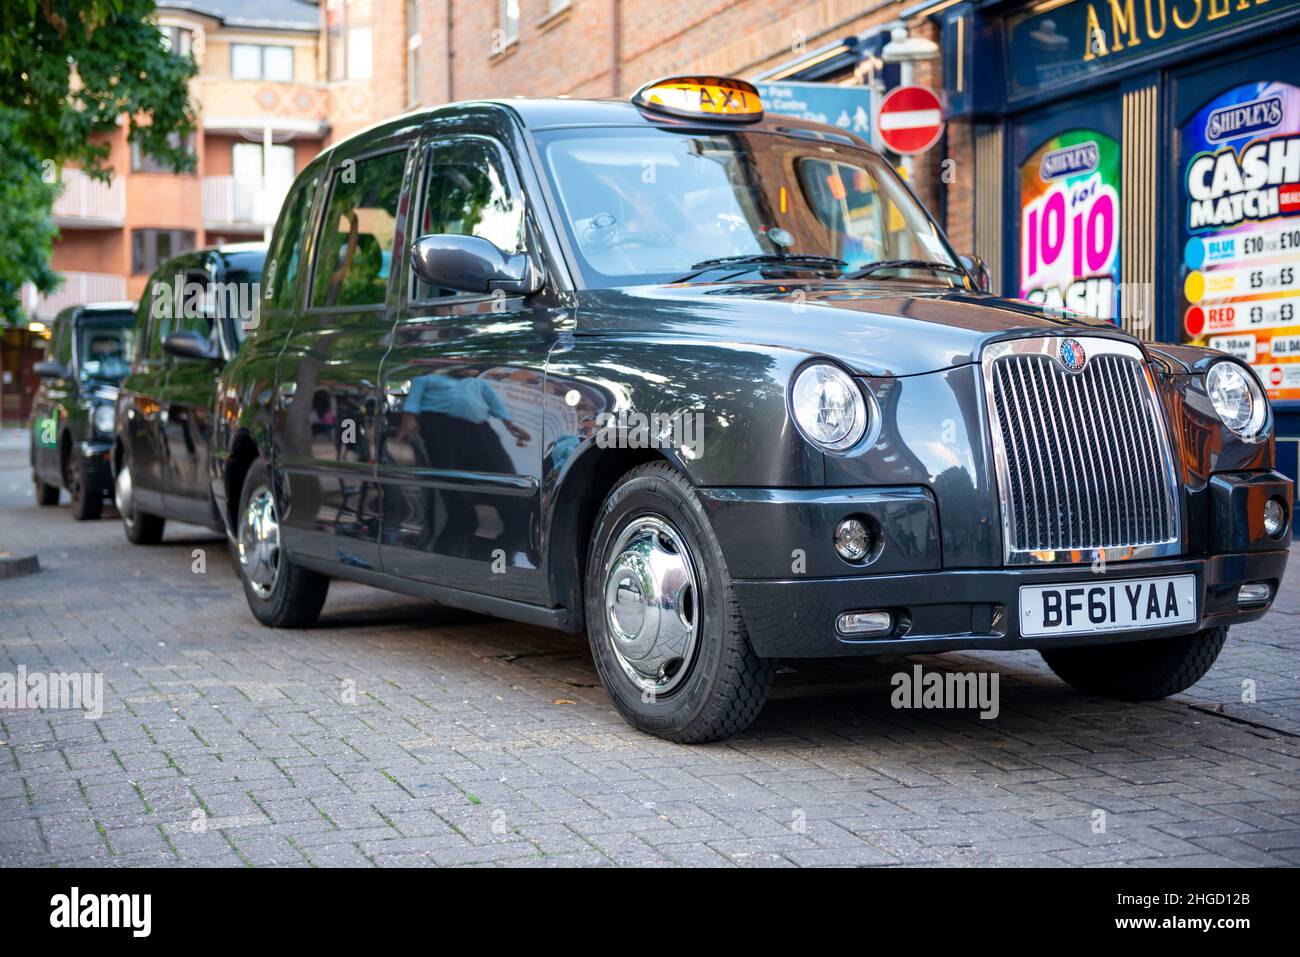 Black cabs for Hackney Carriage Oxford City Council queueing at a taxi rank in Oxford, Oxfordshire, UK Stock Photo